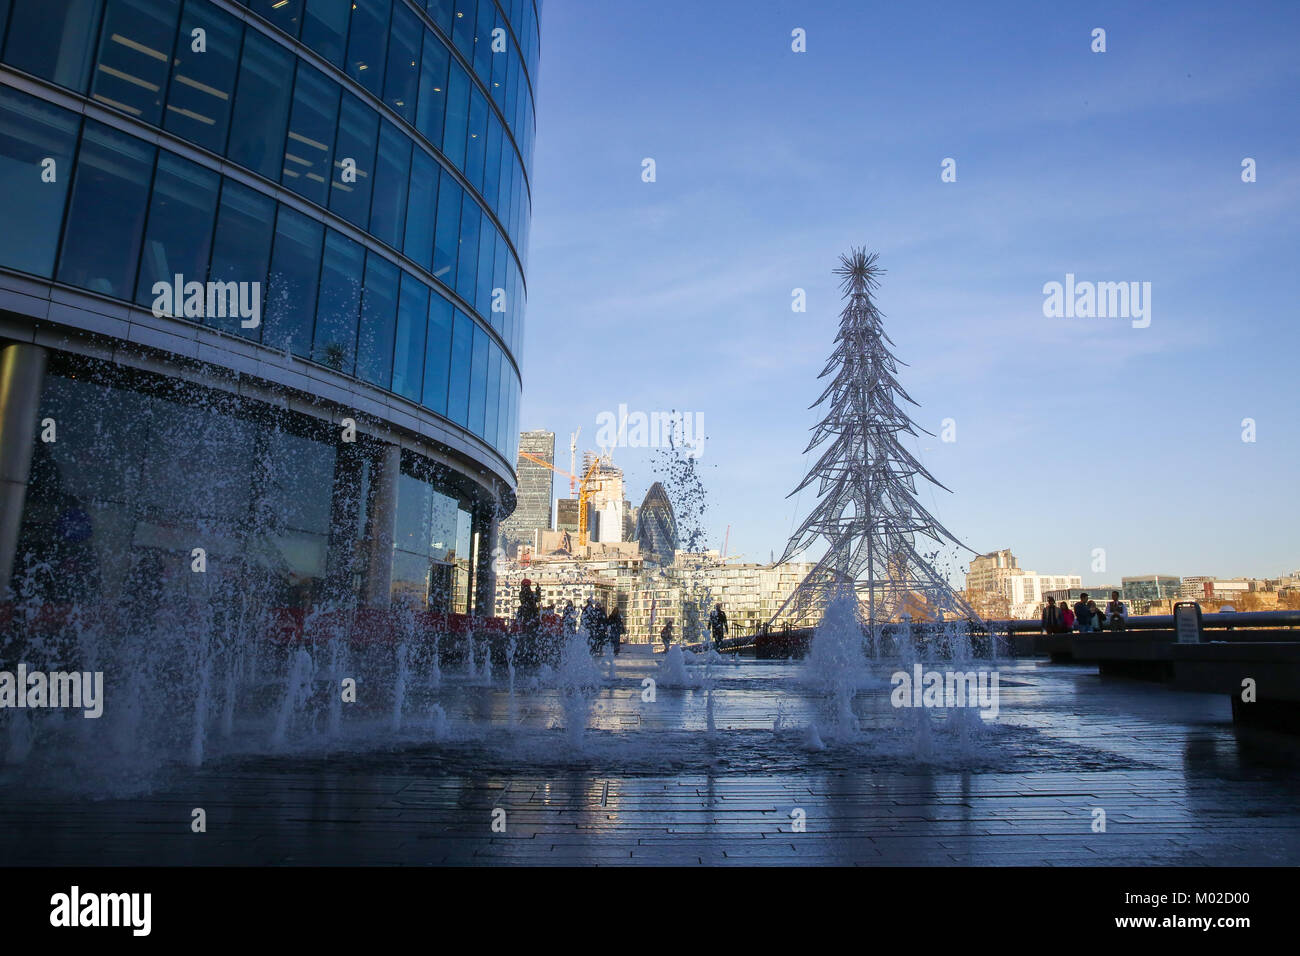 A sunny winter's day with clear blue sky in the capital.  Featuring: A view of a Christmas tree at The London Riviera on a sunny winter's day with clear blue sky. Where: London, United Kingdom When: 18 Dec 2017 Credit: WENN.com Stock Photo